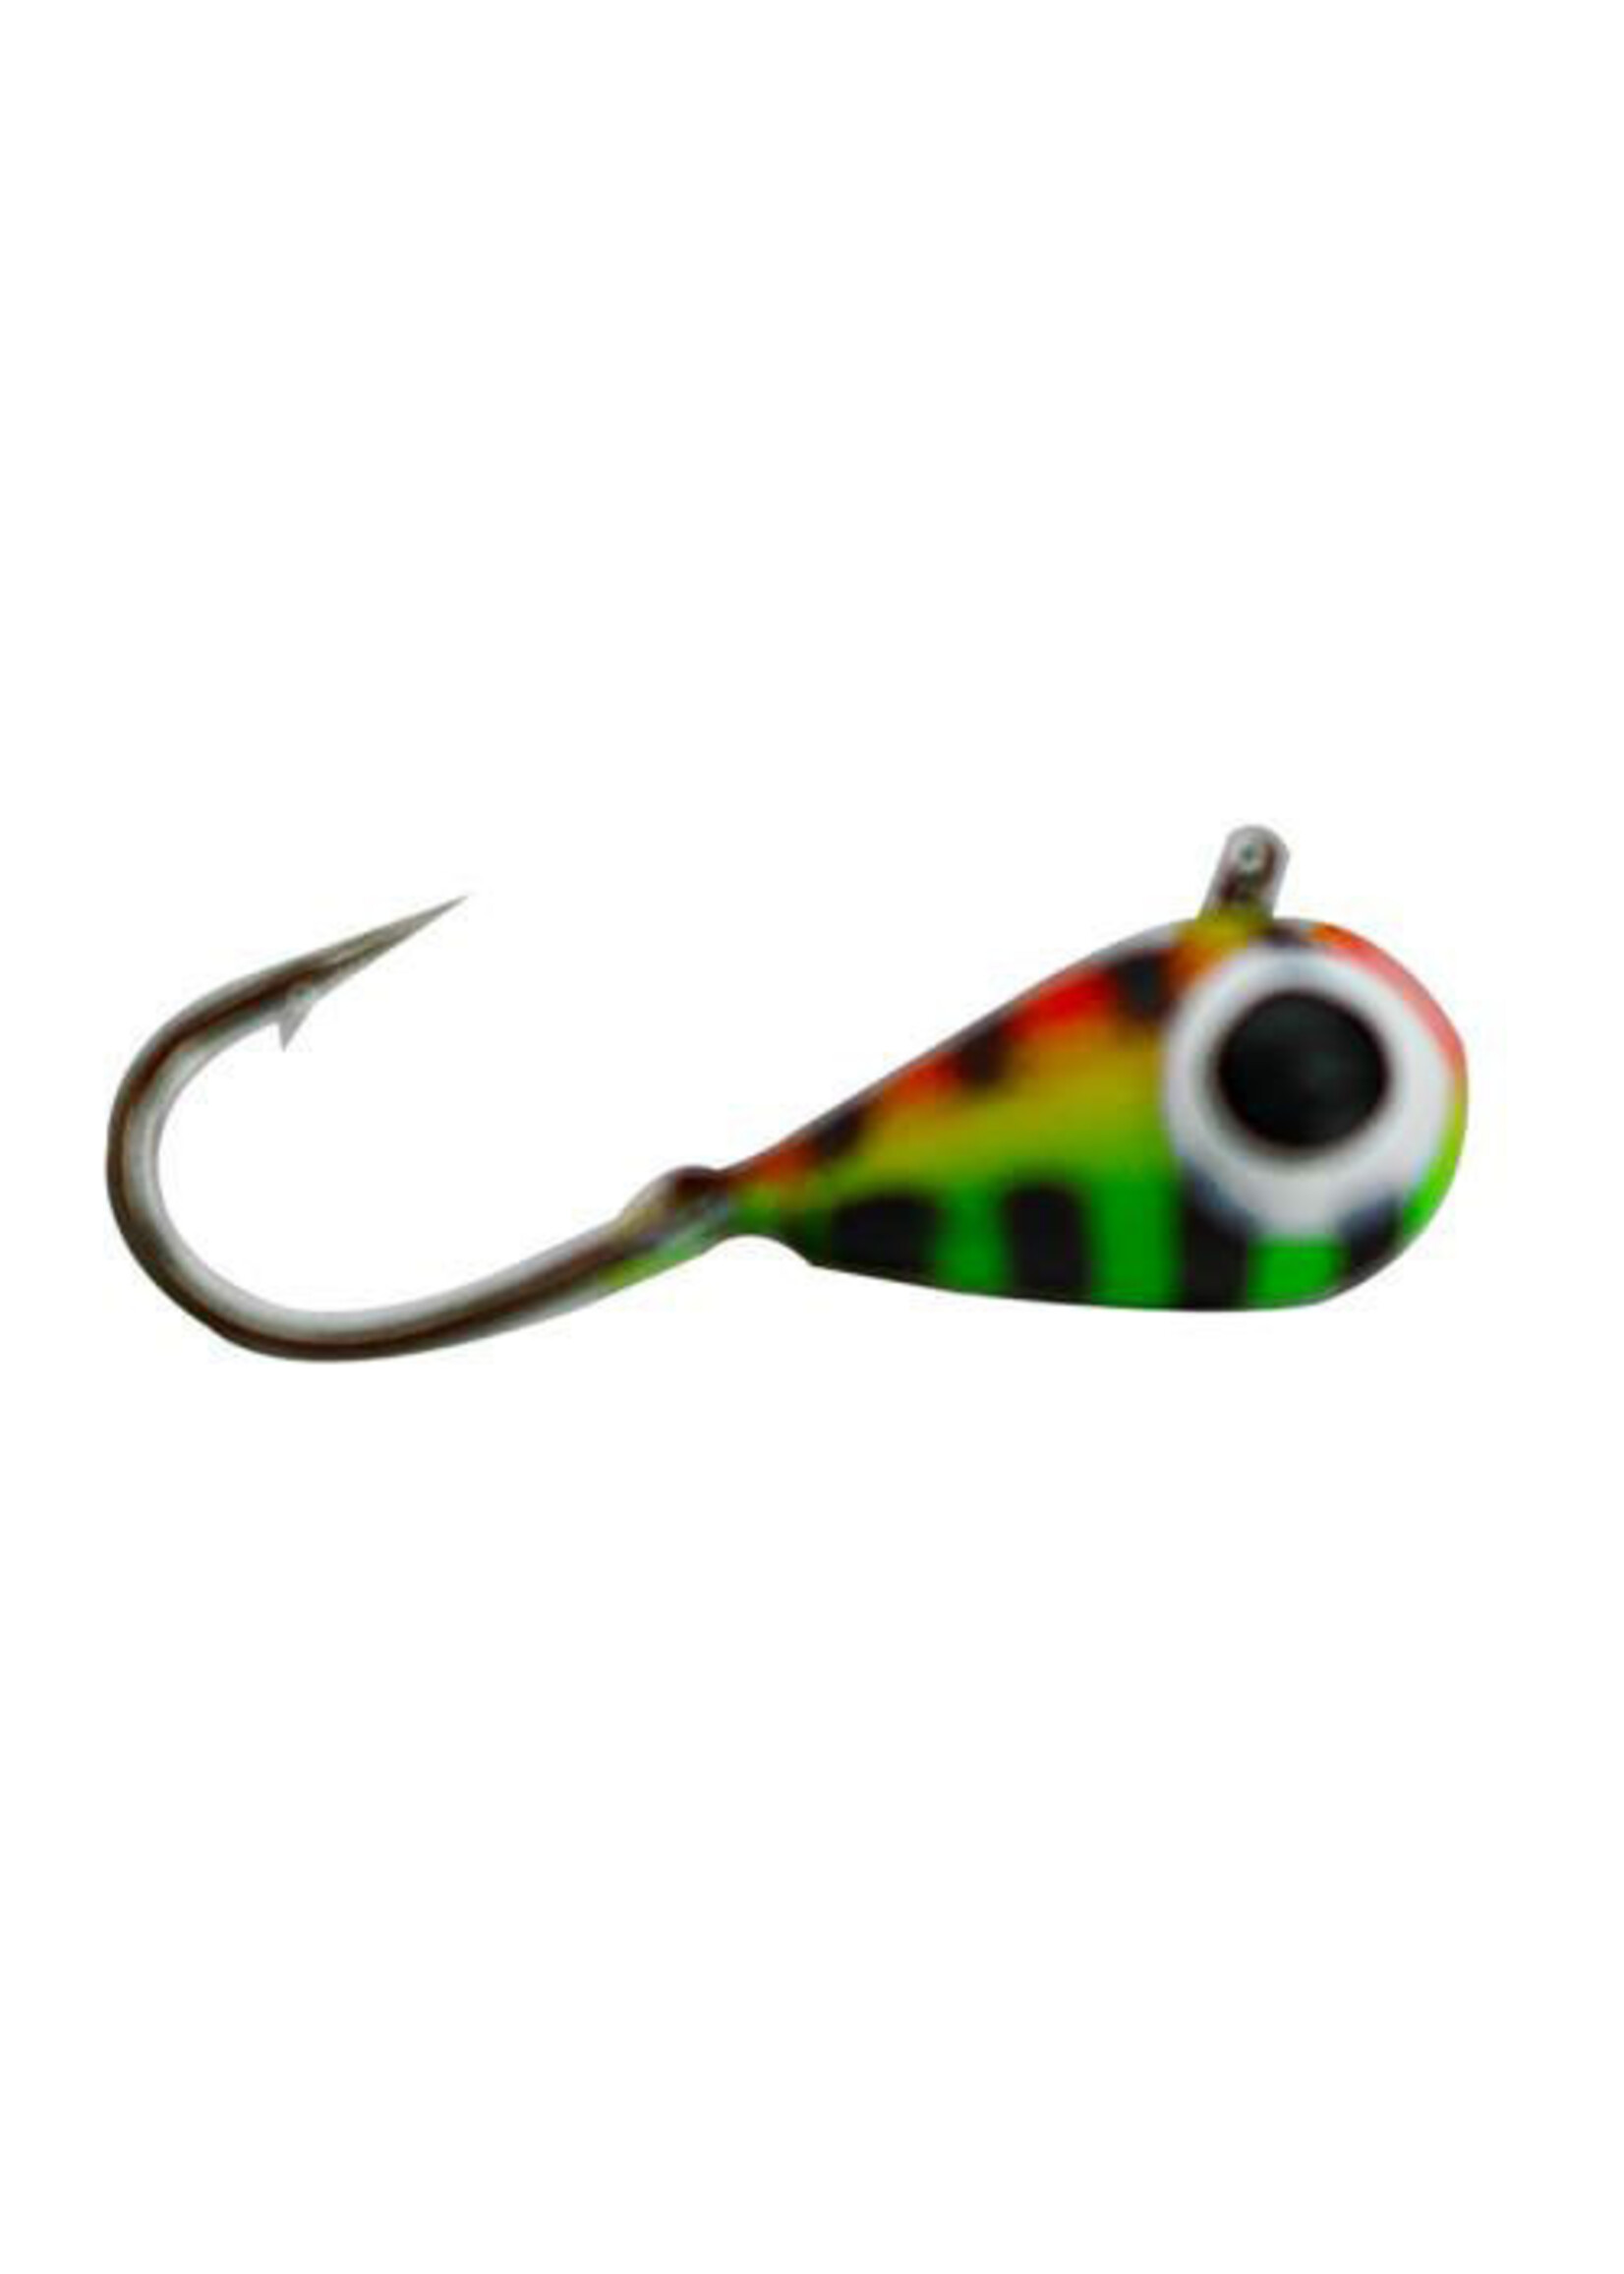 3-5MM Colorful Tungsten Ice Fishing Jigs Ice Fishing Lures Baits